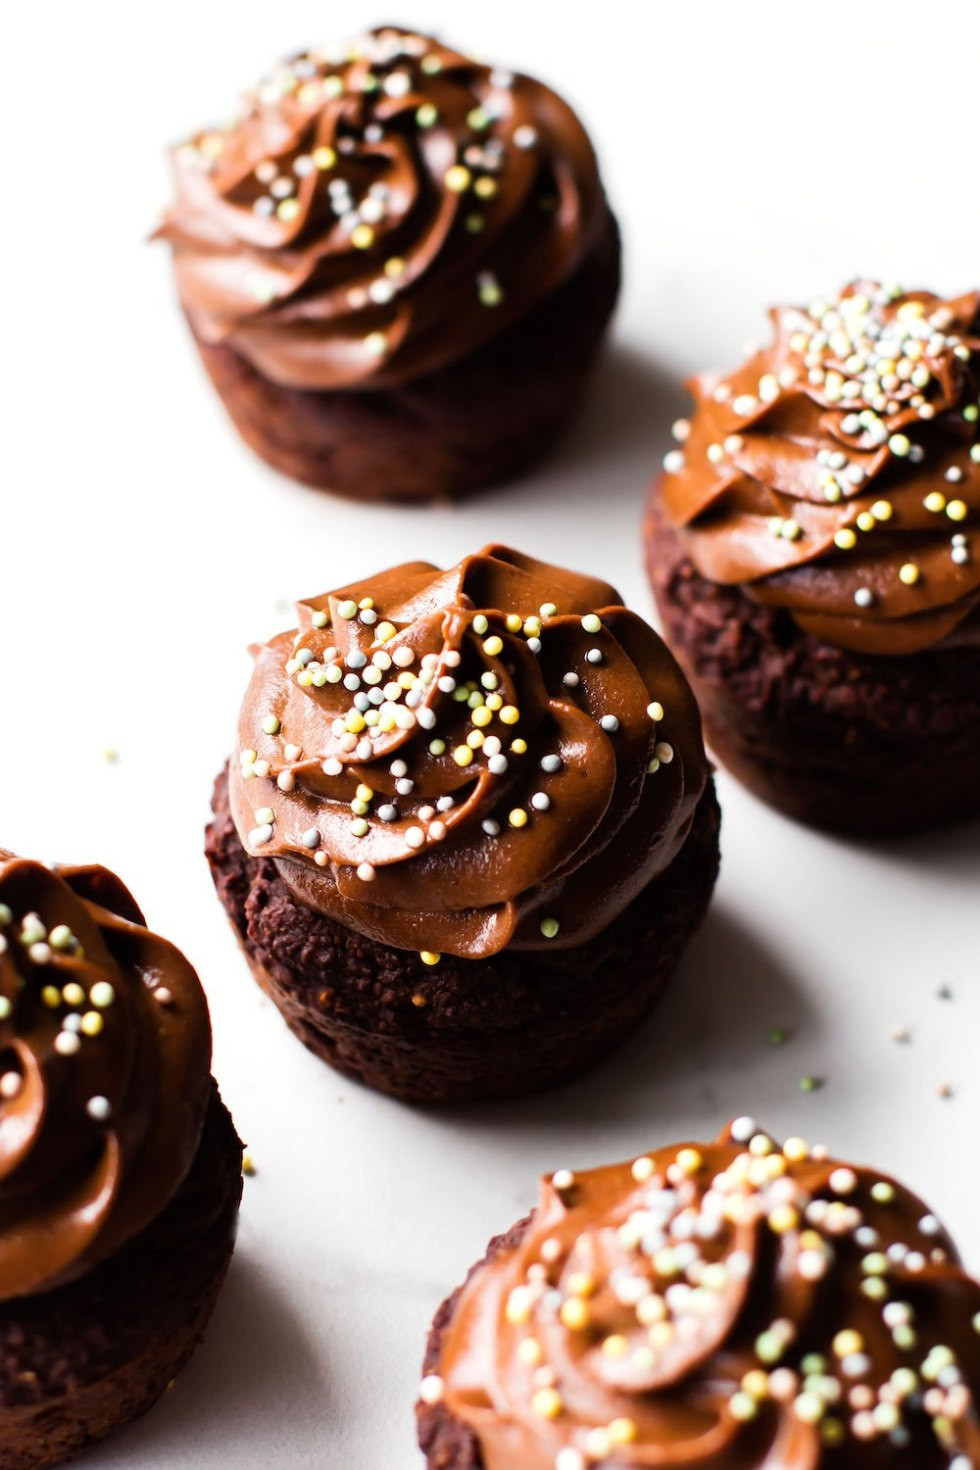 Healthy Chocolate Cupcakes
 The BEST Healthy Chocolate Cupcakes